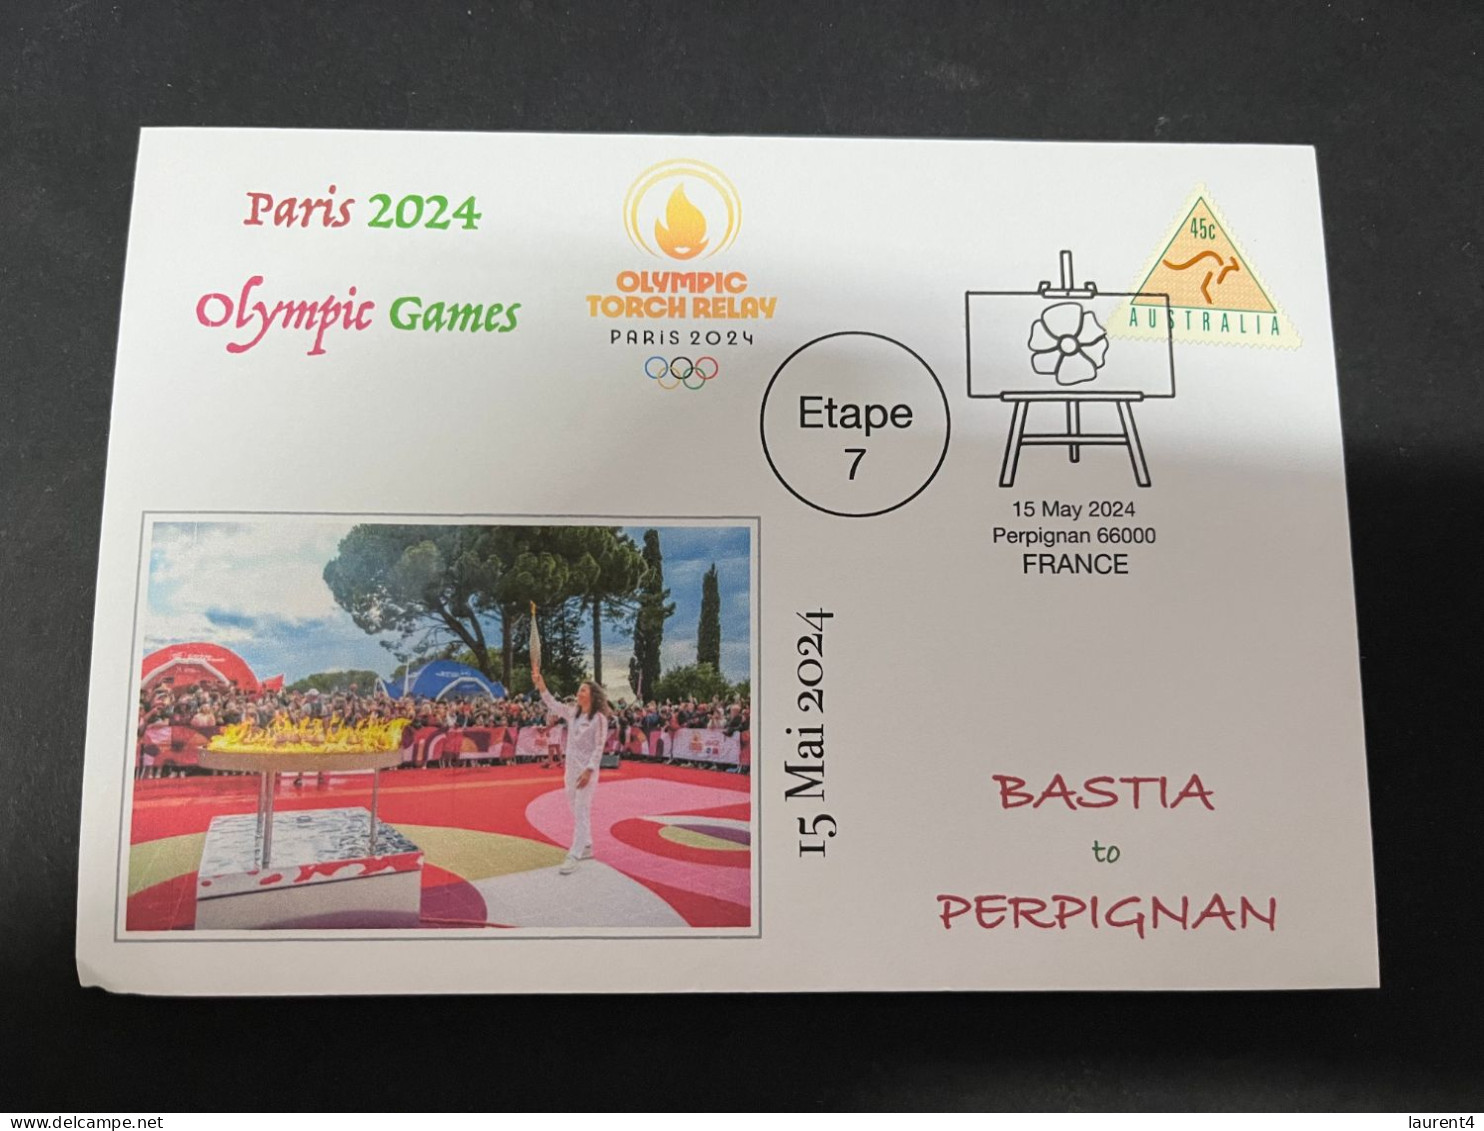 16-5-2024 (5 Z 17) Paris Olympic Games 2024 - Torch Relay (Etape 7) In Perpignan (15-5-2024) With Triangle Stamp - Zomer 2024: Parijs